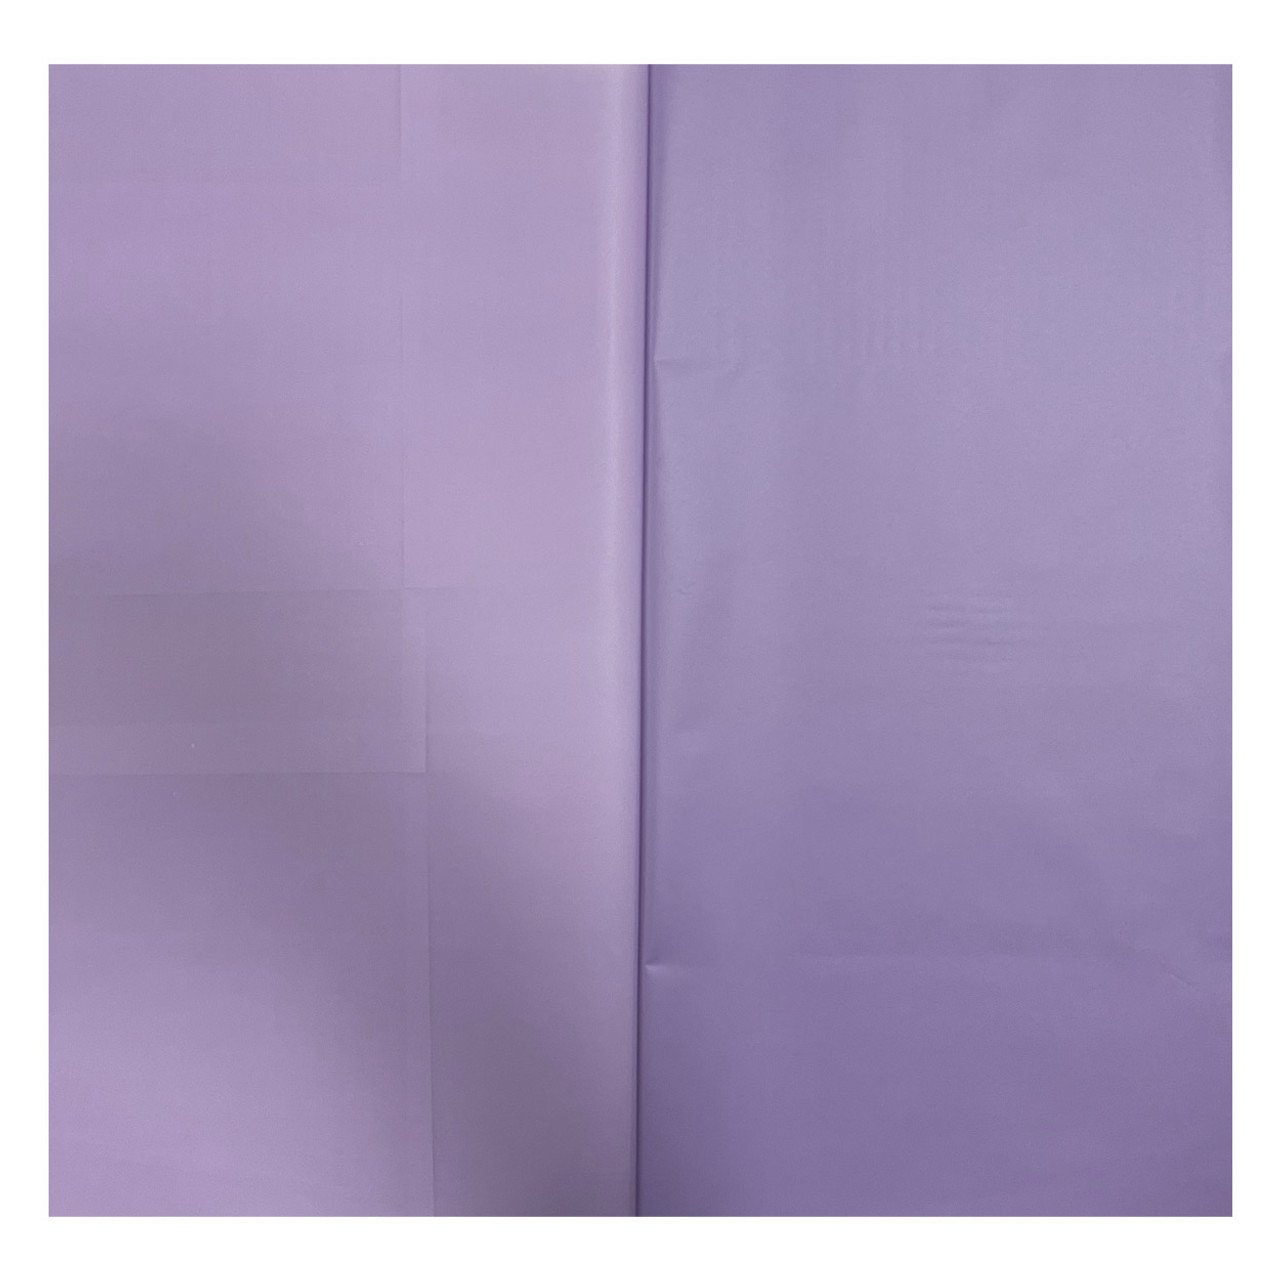 Lavender Floral Wrapping Paper - 20 Sheets - LO Florist Supplies